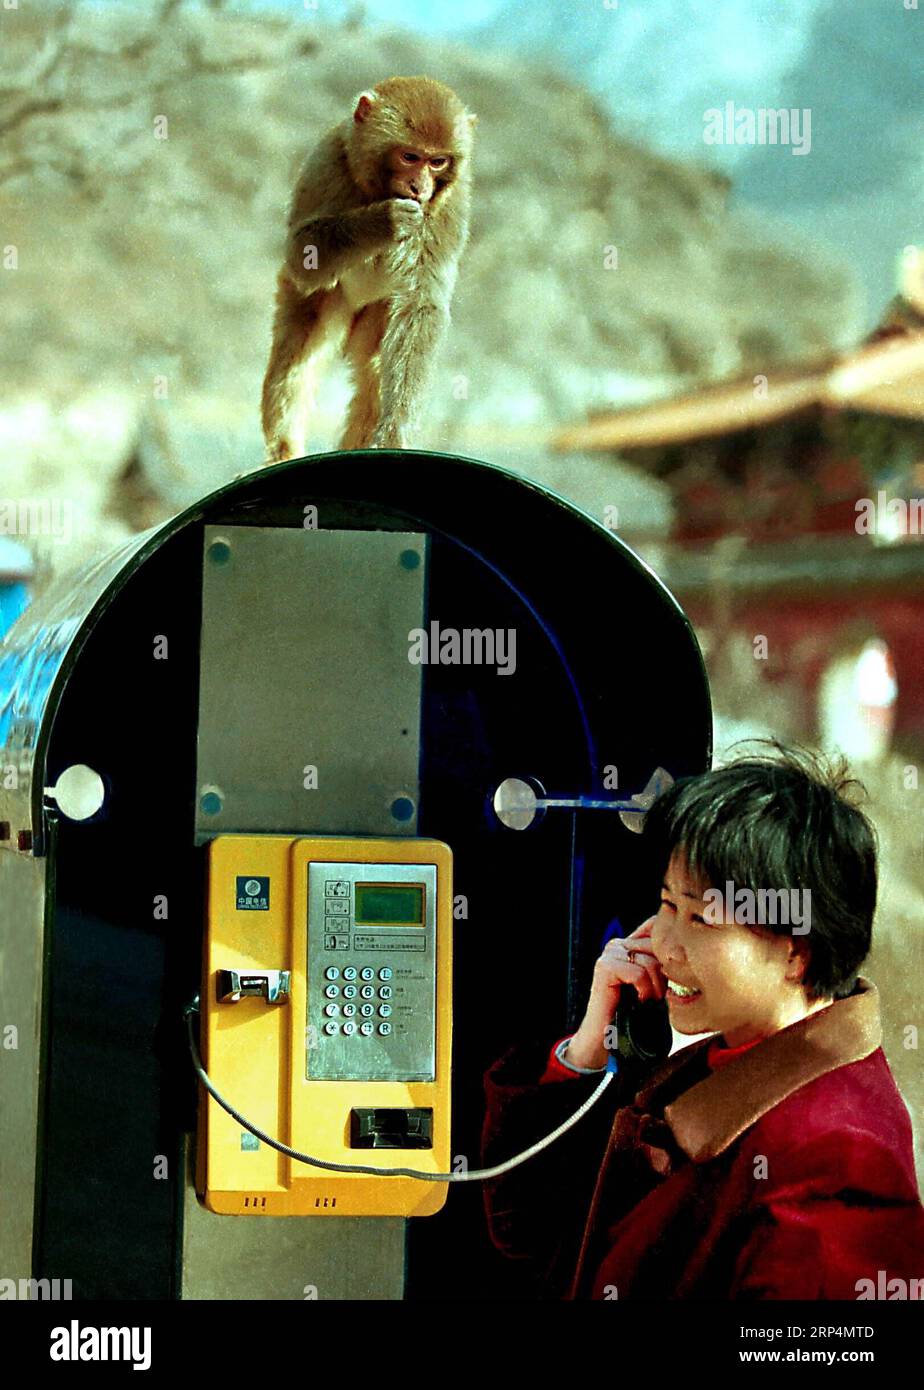 (181113) -- BEIJING, Nov. 13, 2018 (Xinhua) -- A monkey is seen on top of a booth where a tourist makes a phone call at Wulongkou scenic area in Jiyuan, central China s Henan Province, March 16, 2001. More than four decades of sound economic growth from 1978, the starting year of the reform and opening-up policy, has fundamentally lifted life quality of 1.3 billion Chinese, who are now able to enjoy the global village thanks to the advanced telecom infrastructure. However, Chinese people also ever went through the time when writing letters was the most frequent means to contact with faraway re Stock Photo